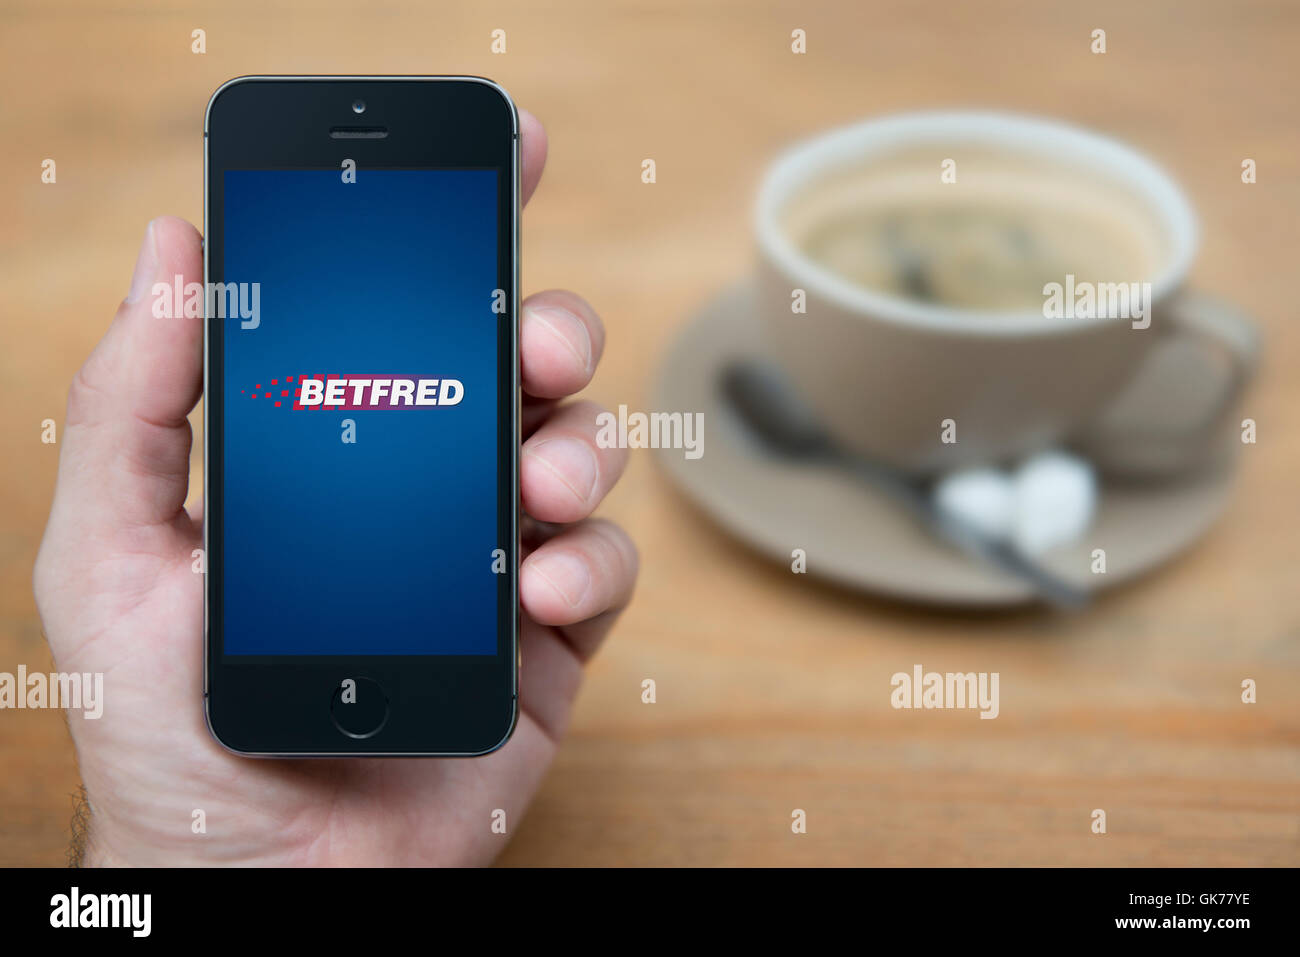 A man looks at his iPhone which displays the Betfred logo, while sat with a cup of coffee (Editorial use only). Stock Photo